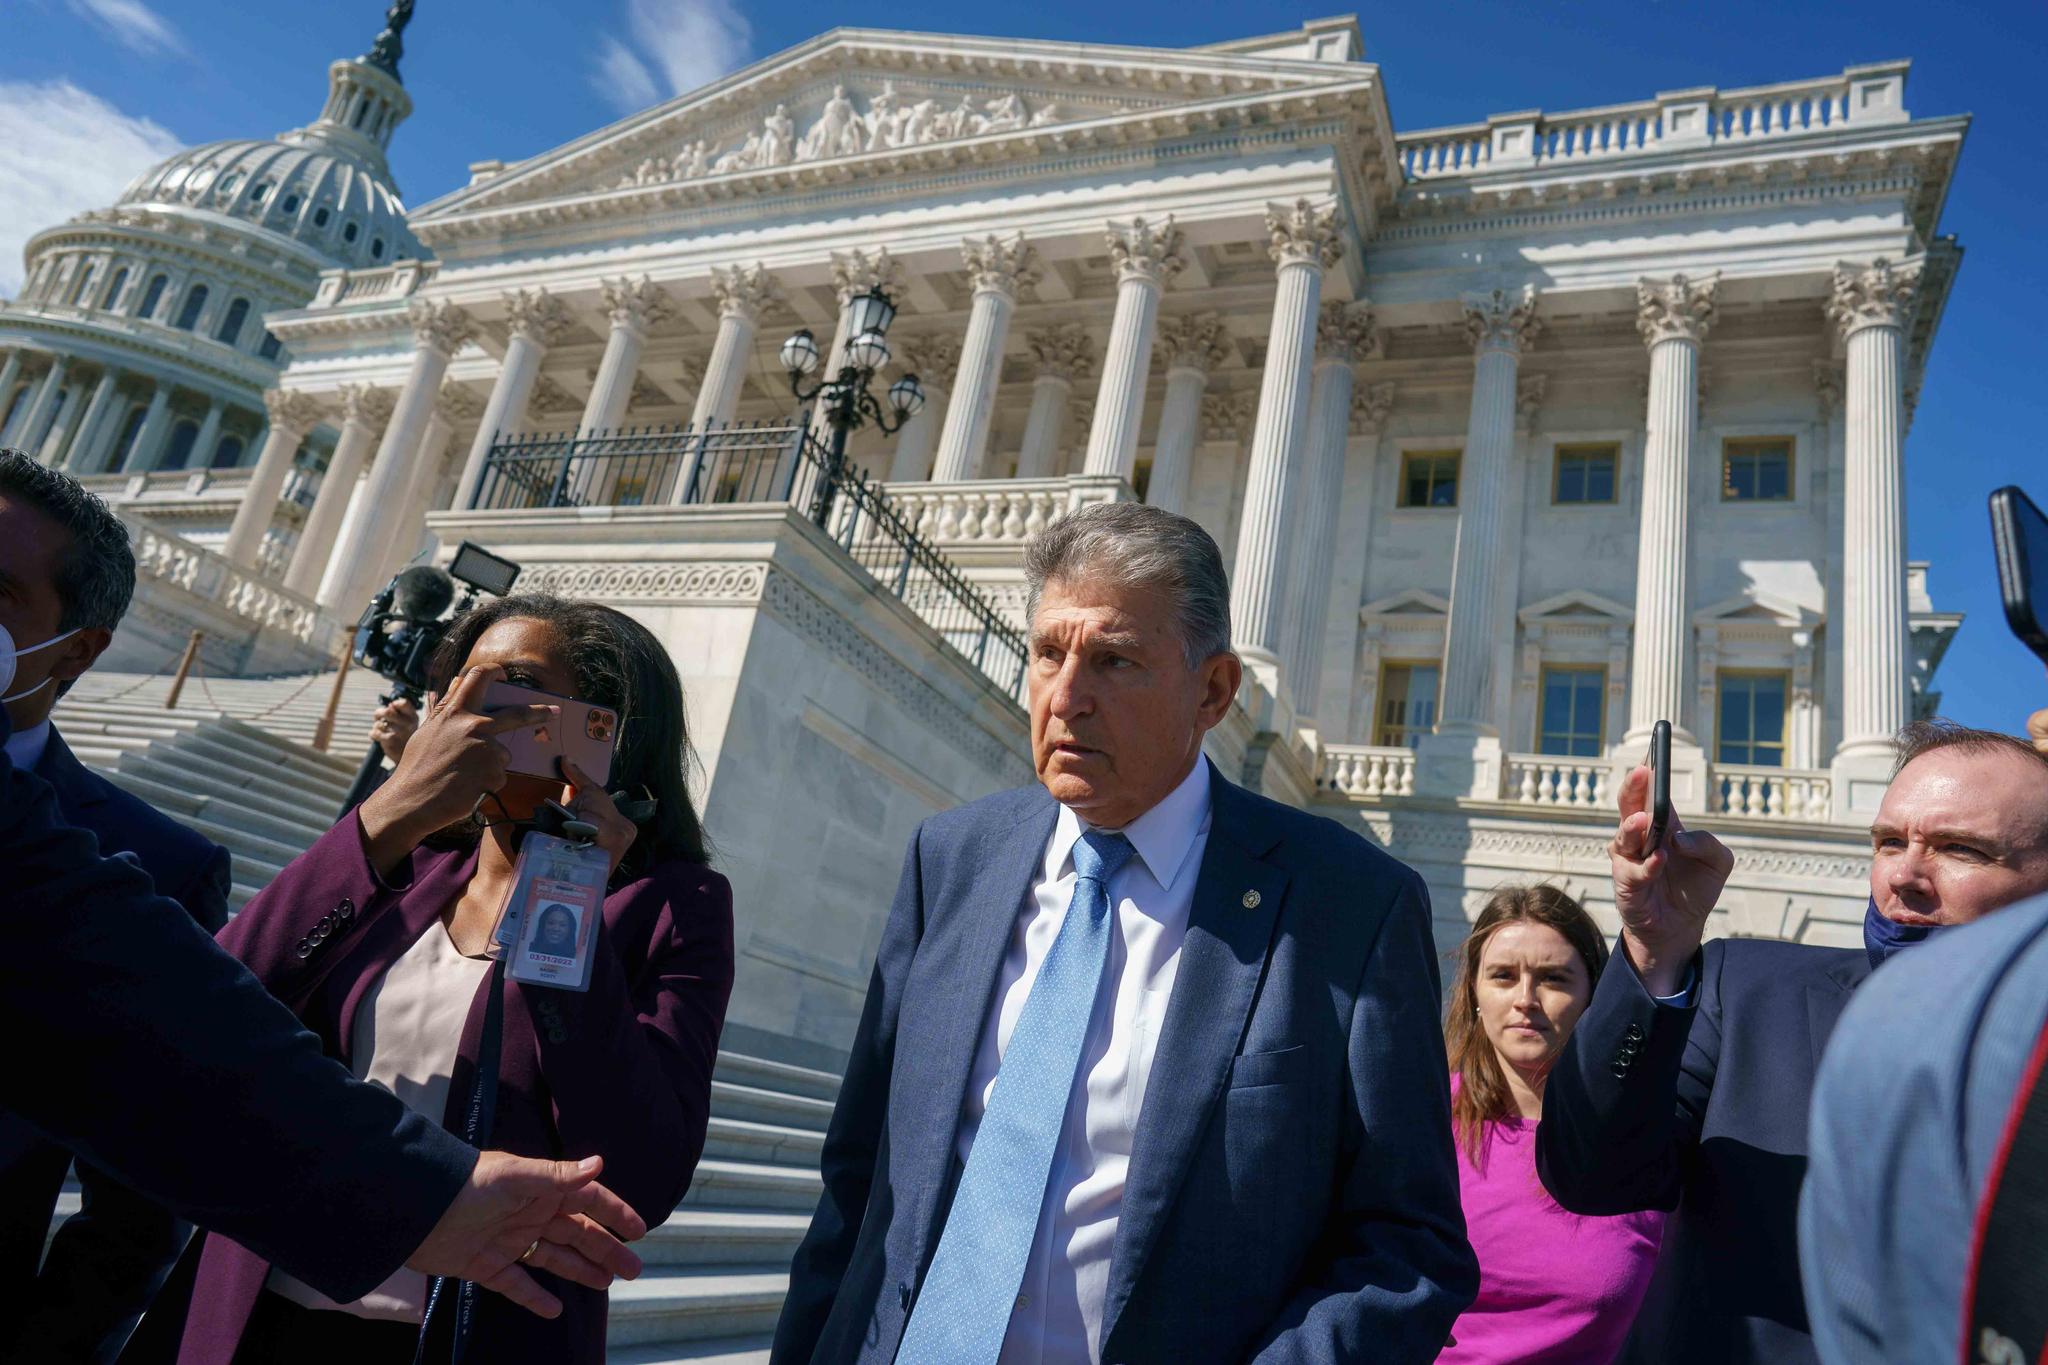 Sen. Joe Manchin, D-W.Va., a centrist Democrat vital to the fate of President Joe Biden's $3.5 trillion domestic agenda, is surrounded by reporters outside the Capitol in Washington, Wednesday, Sept. 29, 2021.